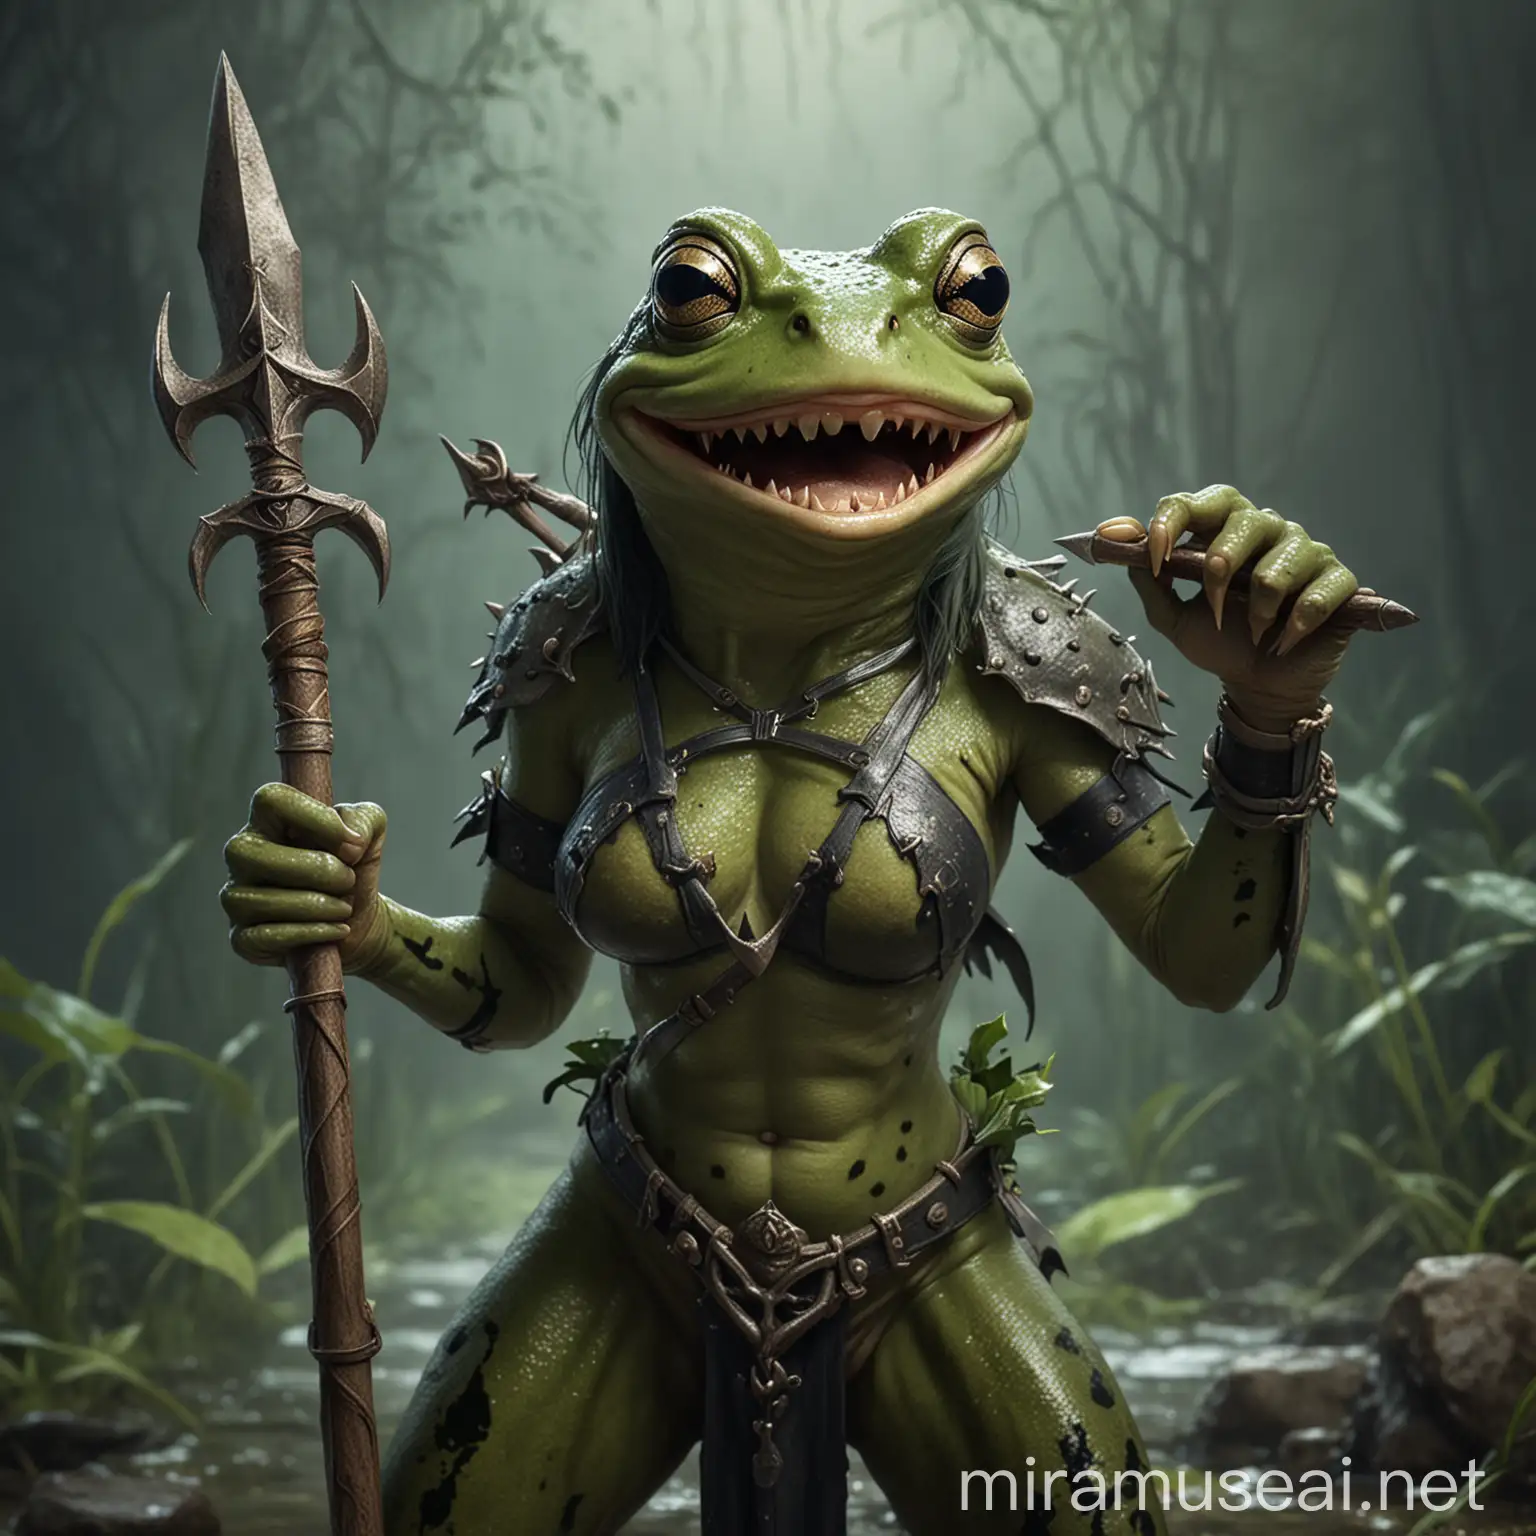 Powerful Female Frog with Fangs and Trident